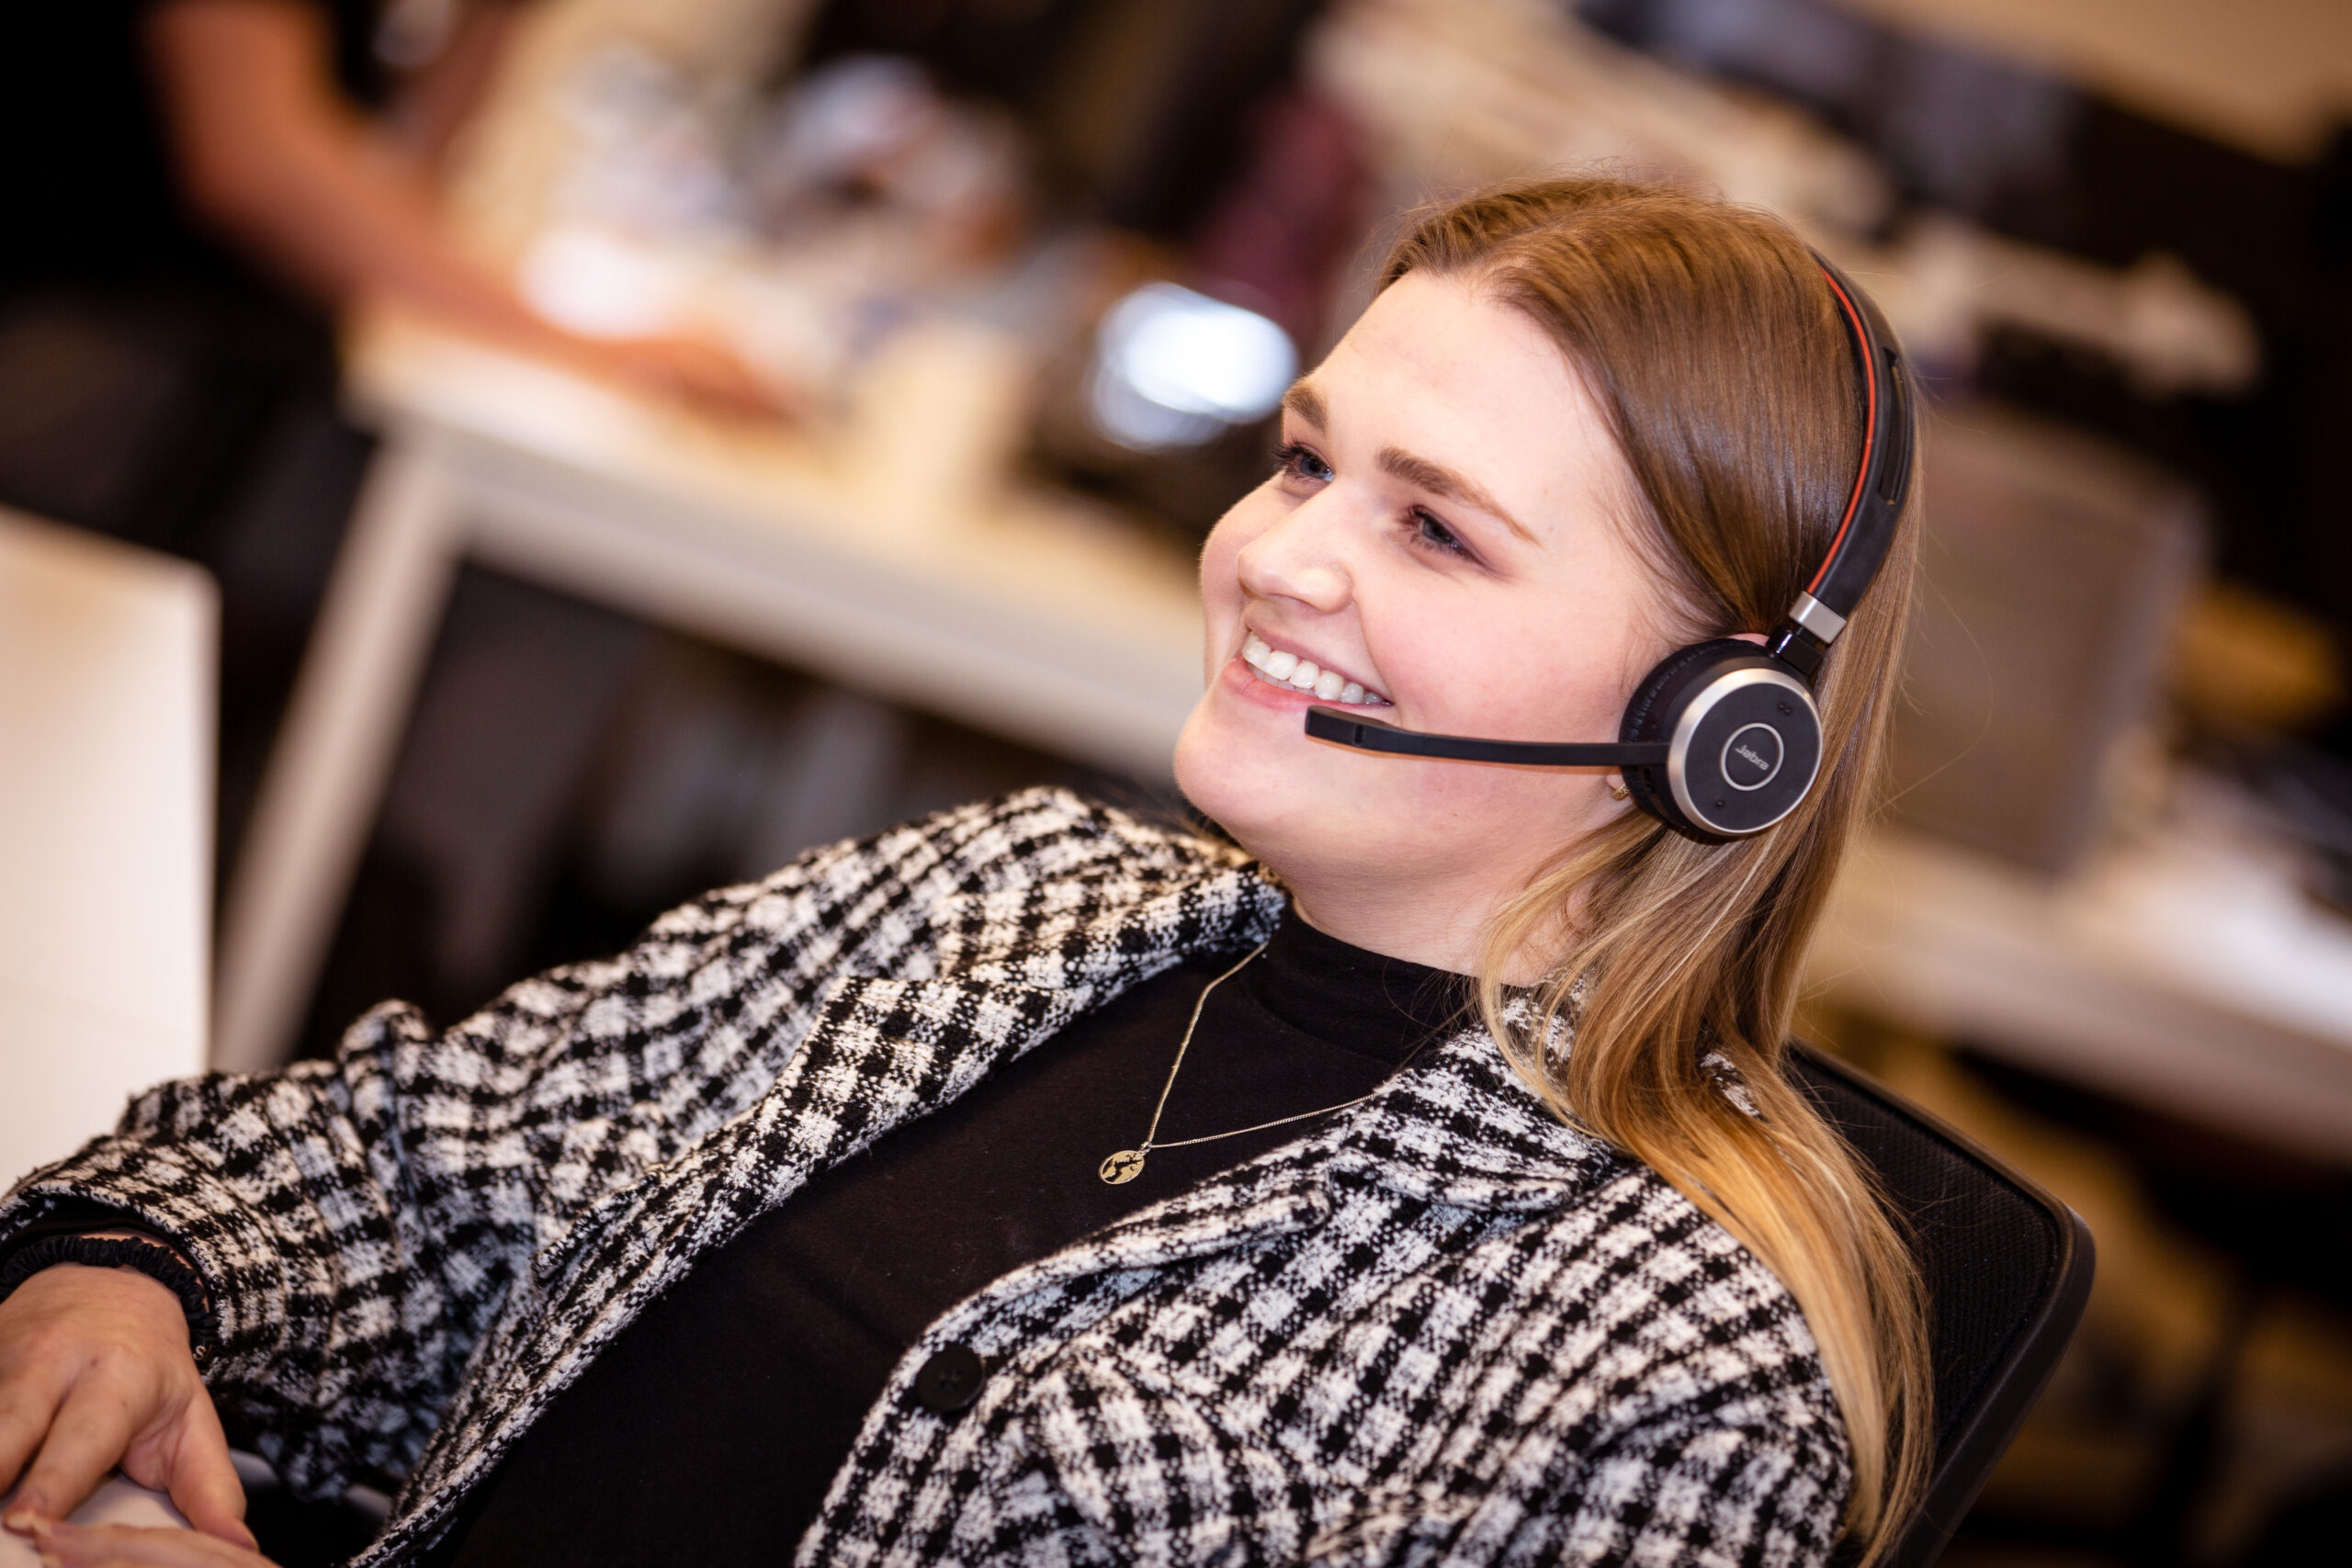 Elite Office member working with a headset on